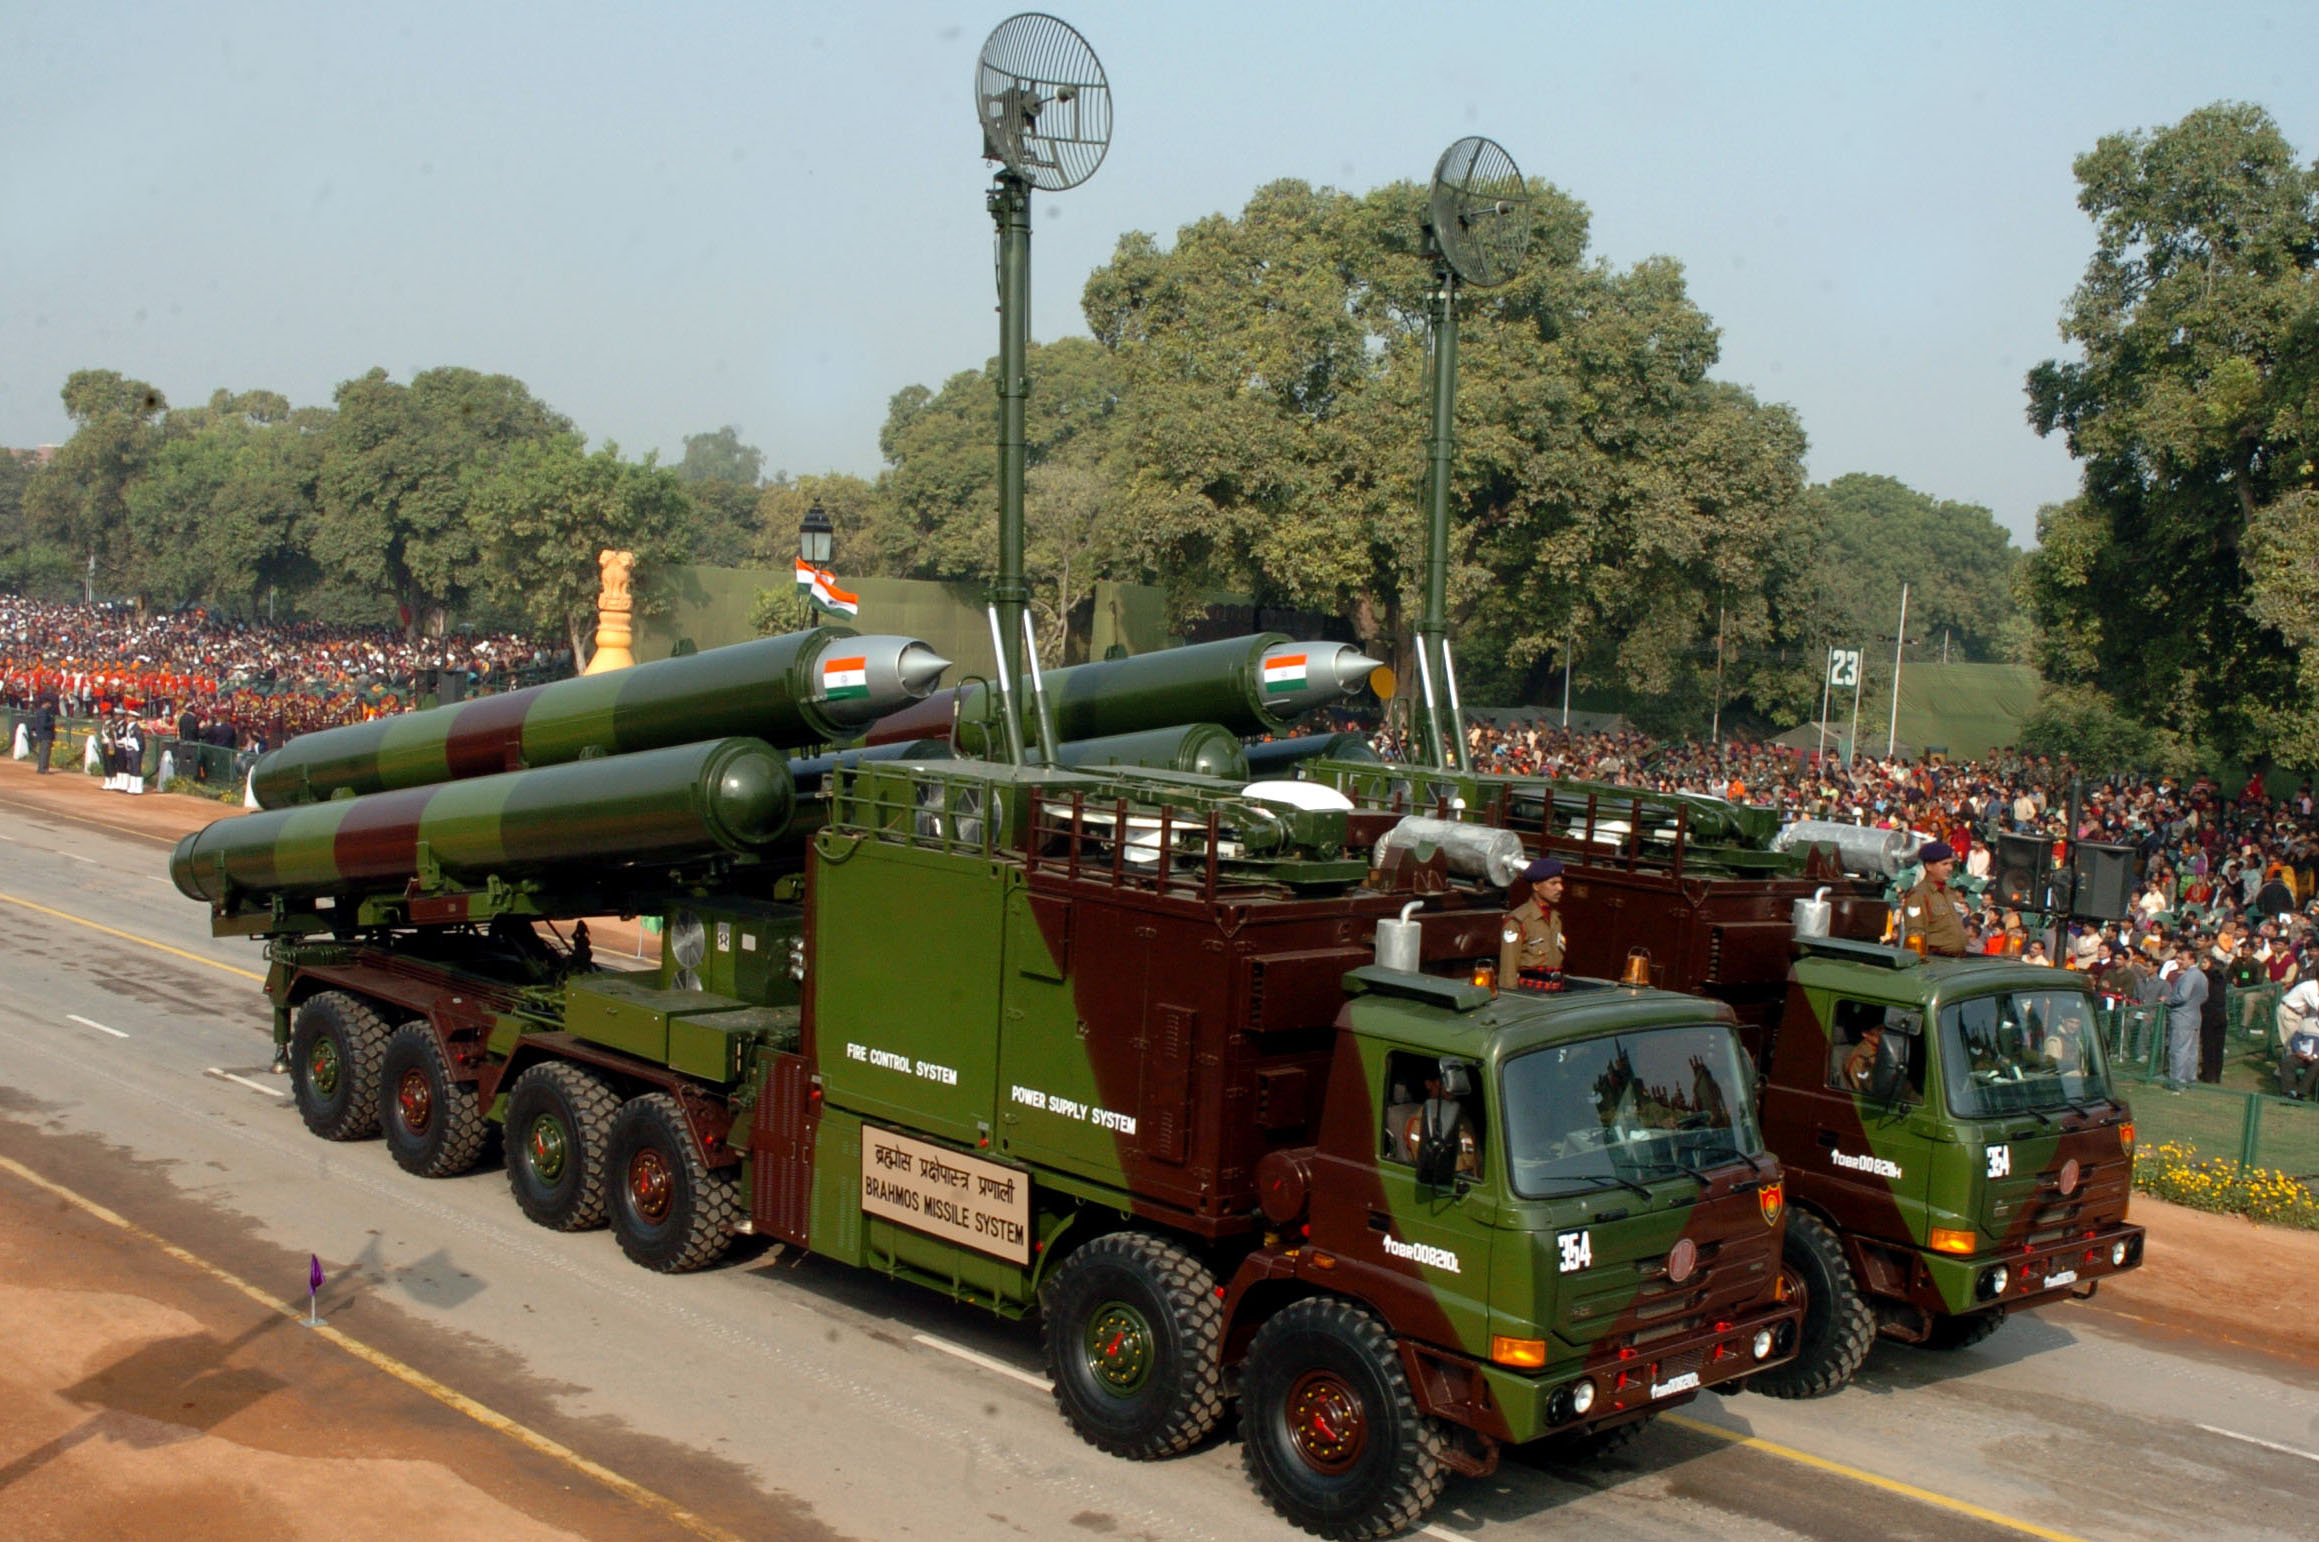 Missile Proliferation in the Asia-Pacific: The Shadow Over Regional Stability